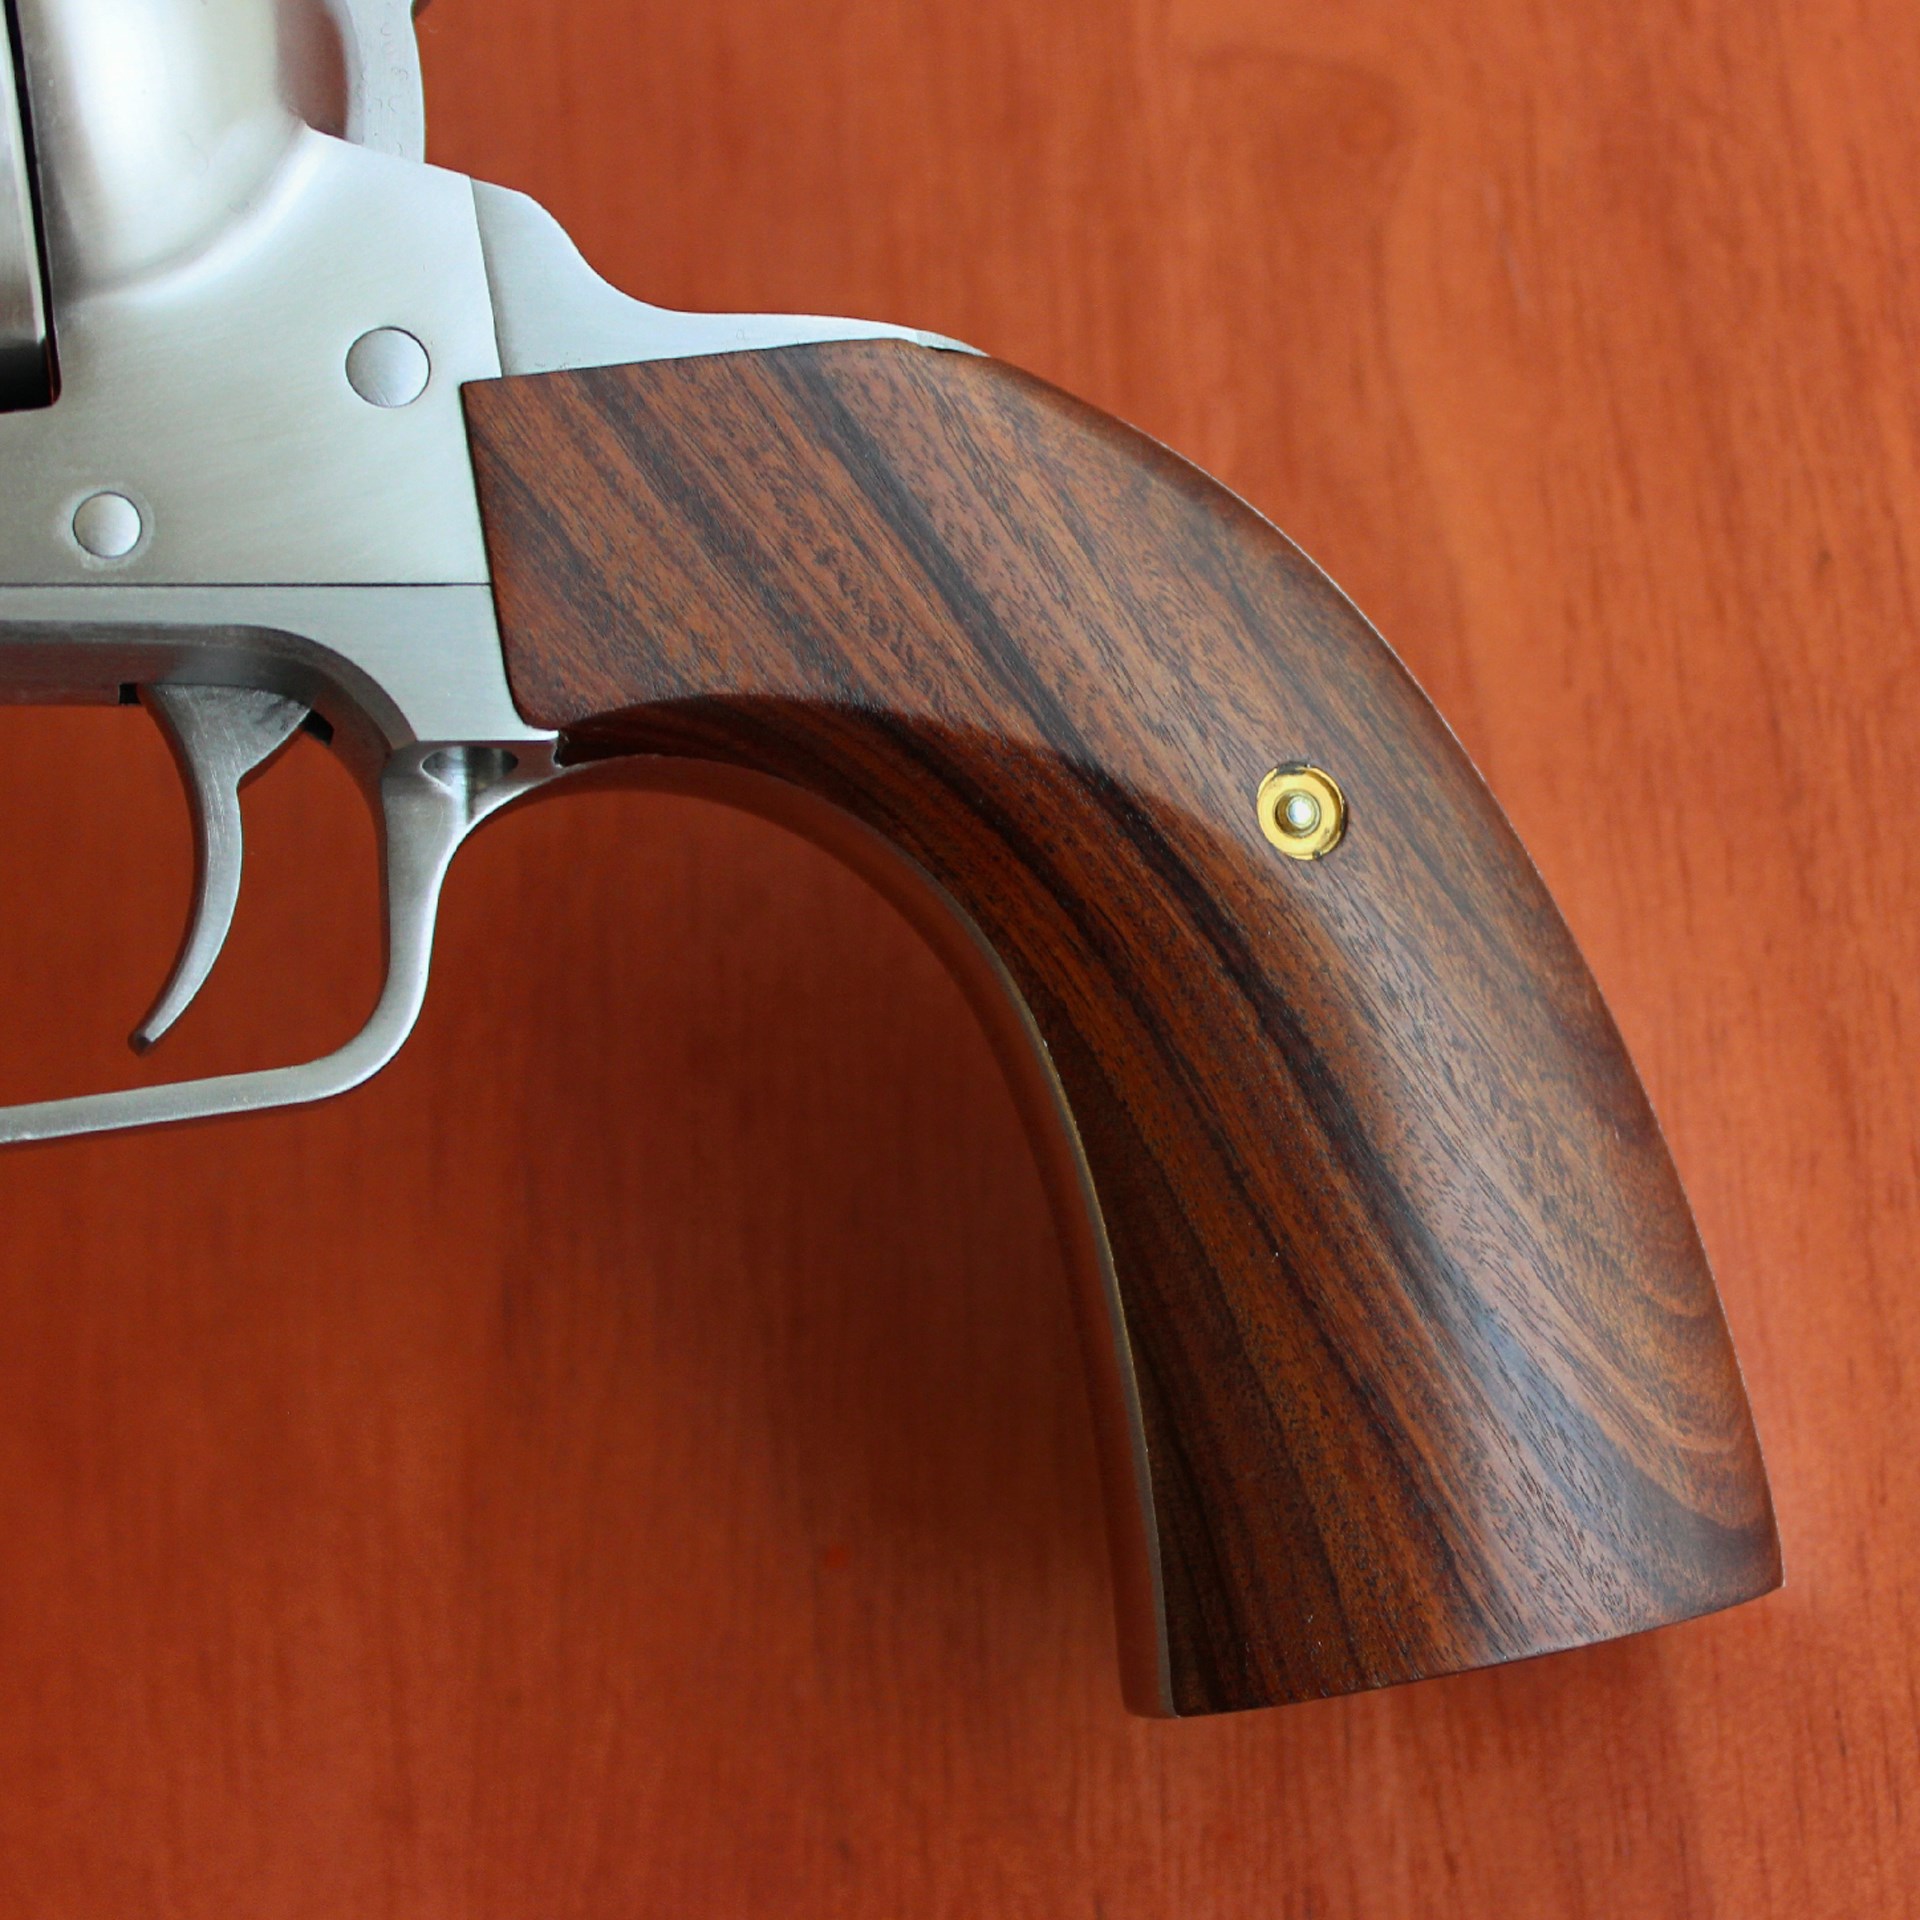 Magnum Research BFR stainless steel detail closeup grip rosewood stock